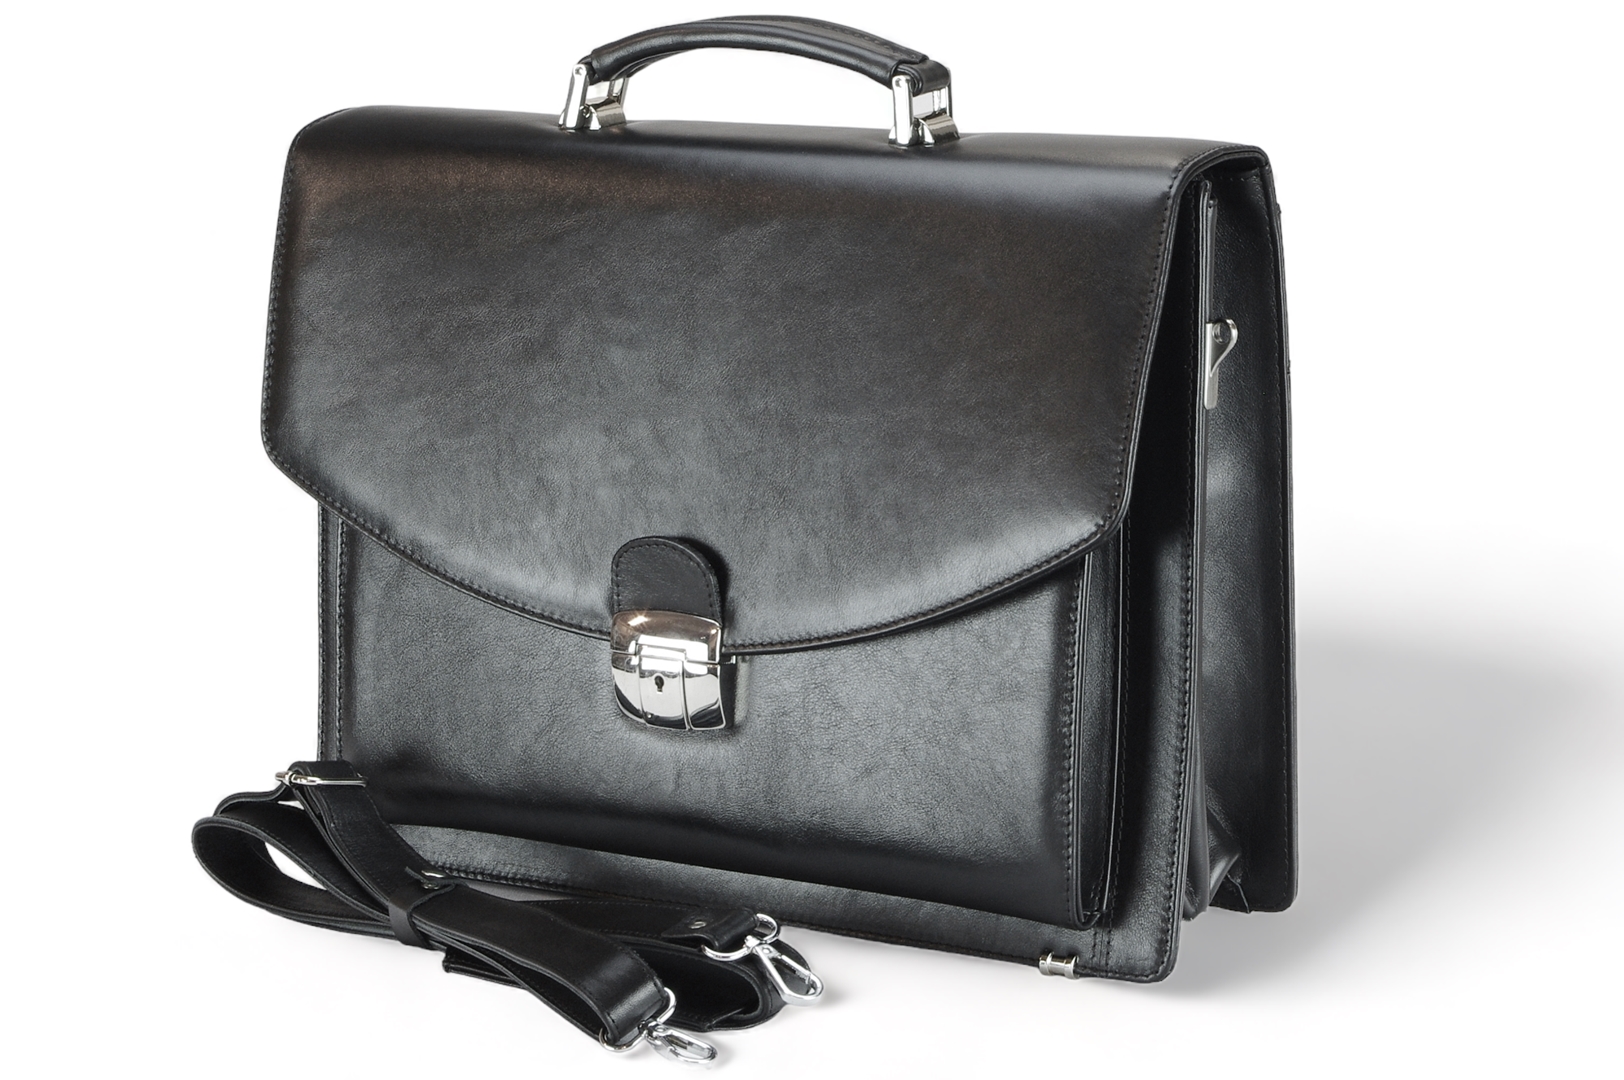 LEATHER BRIEFCASE Model A4 5 BL 0-1B